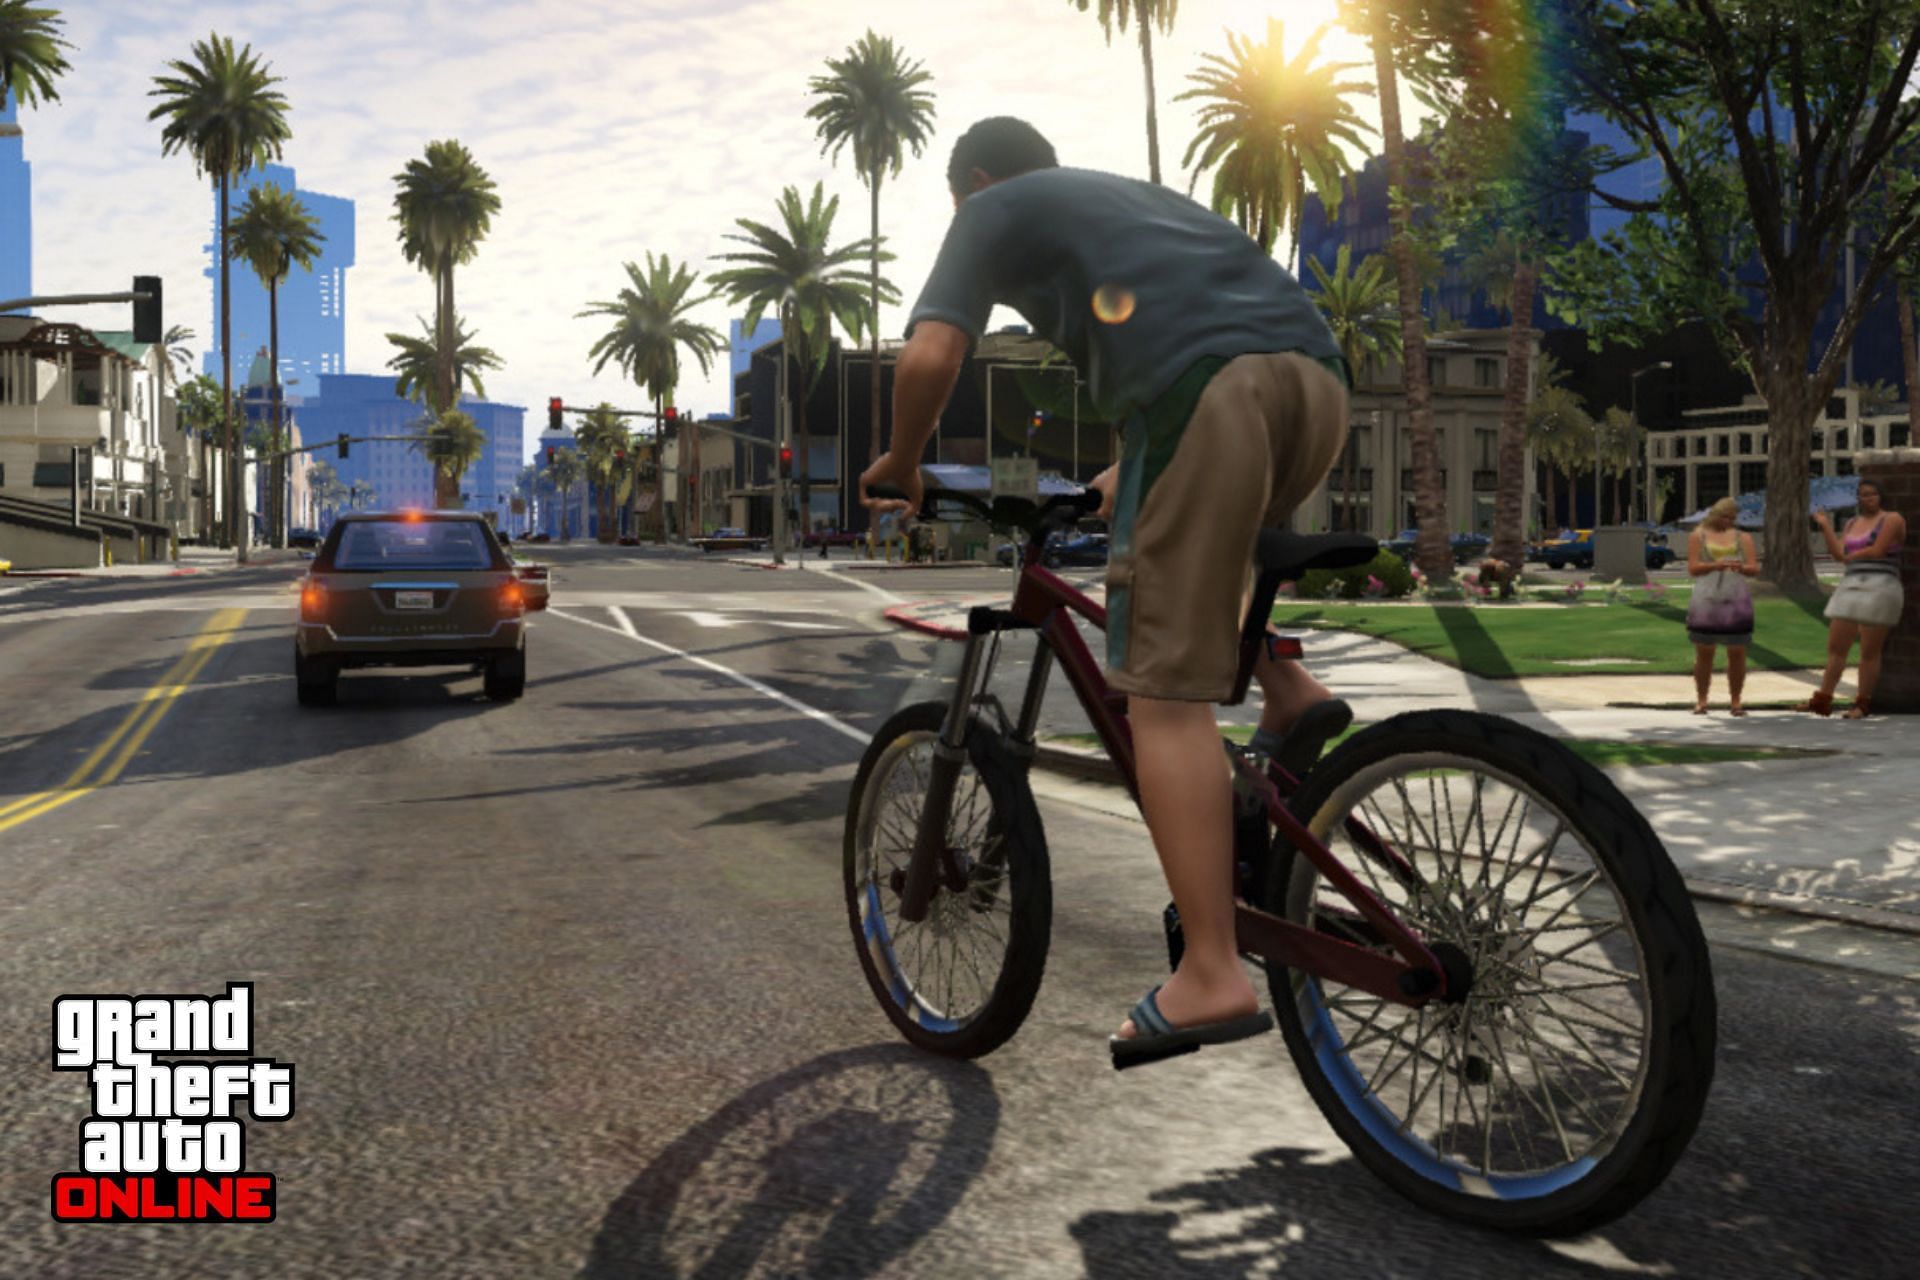 This hacker really impressed the Grand Theft Auto Online community (Images via Sportskeeda)